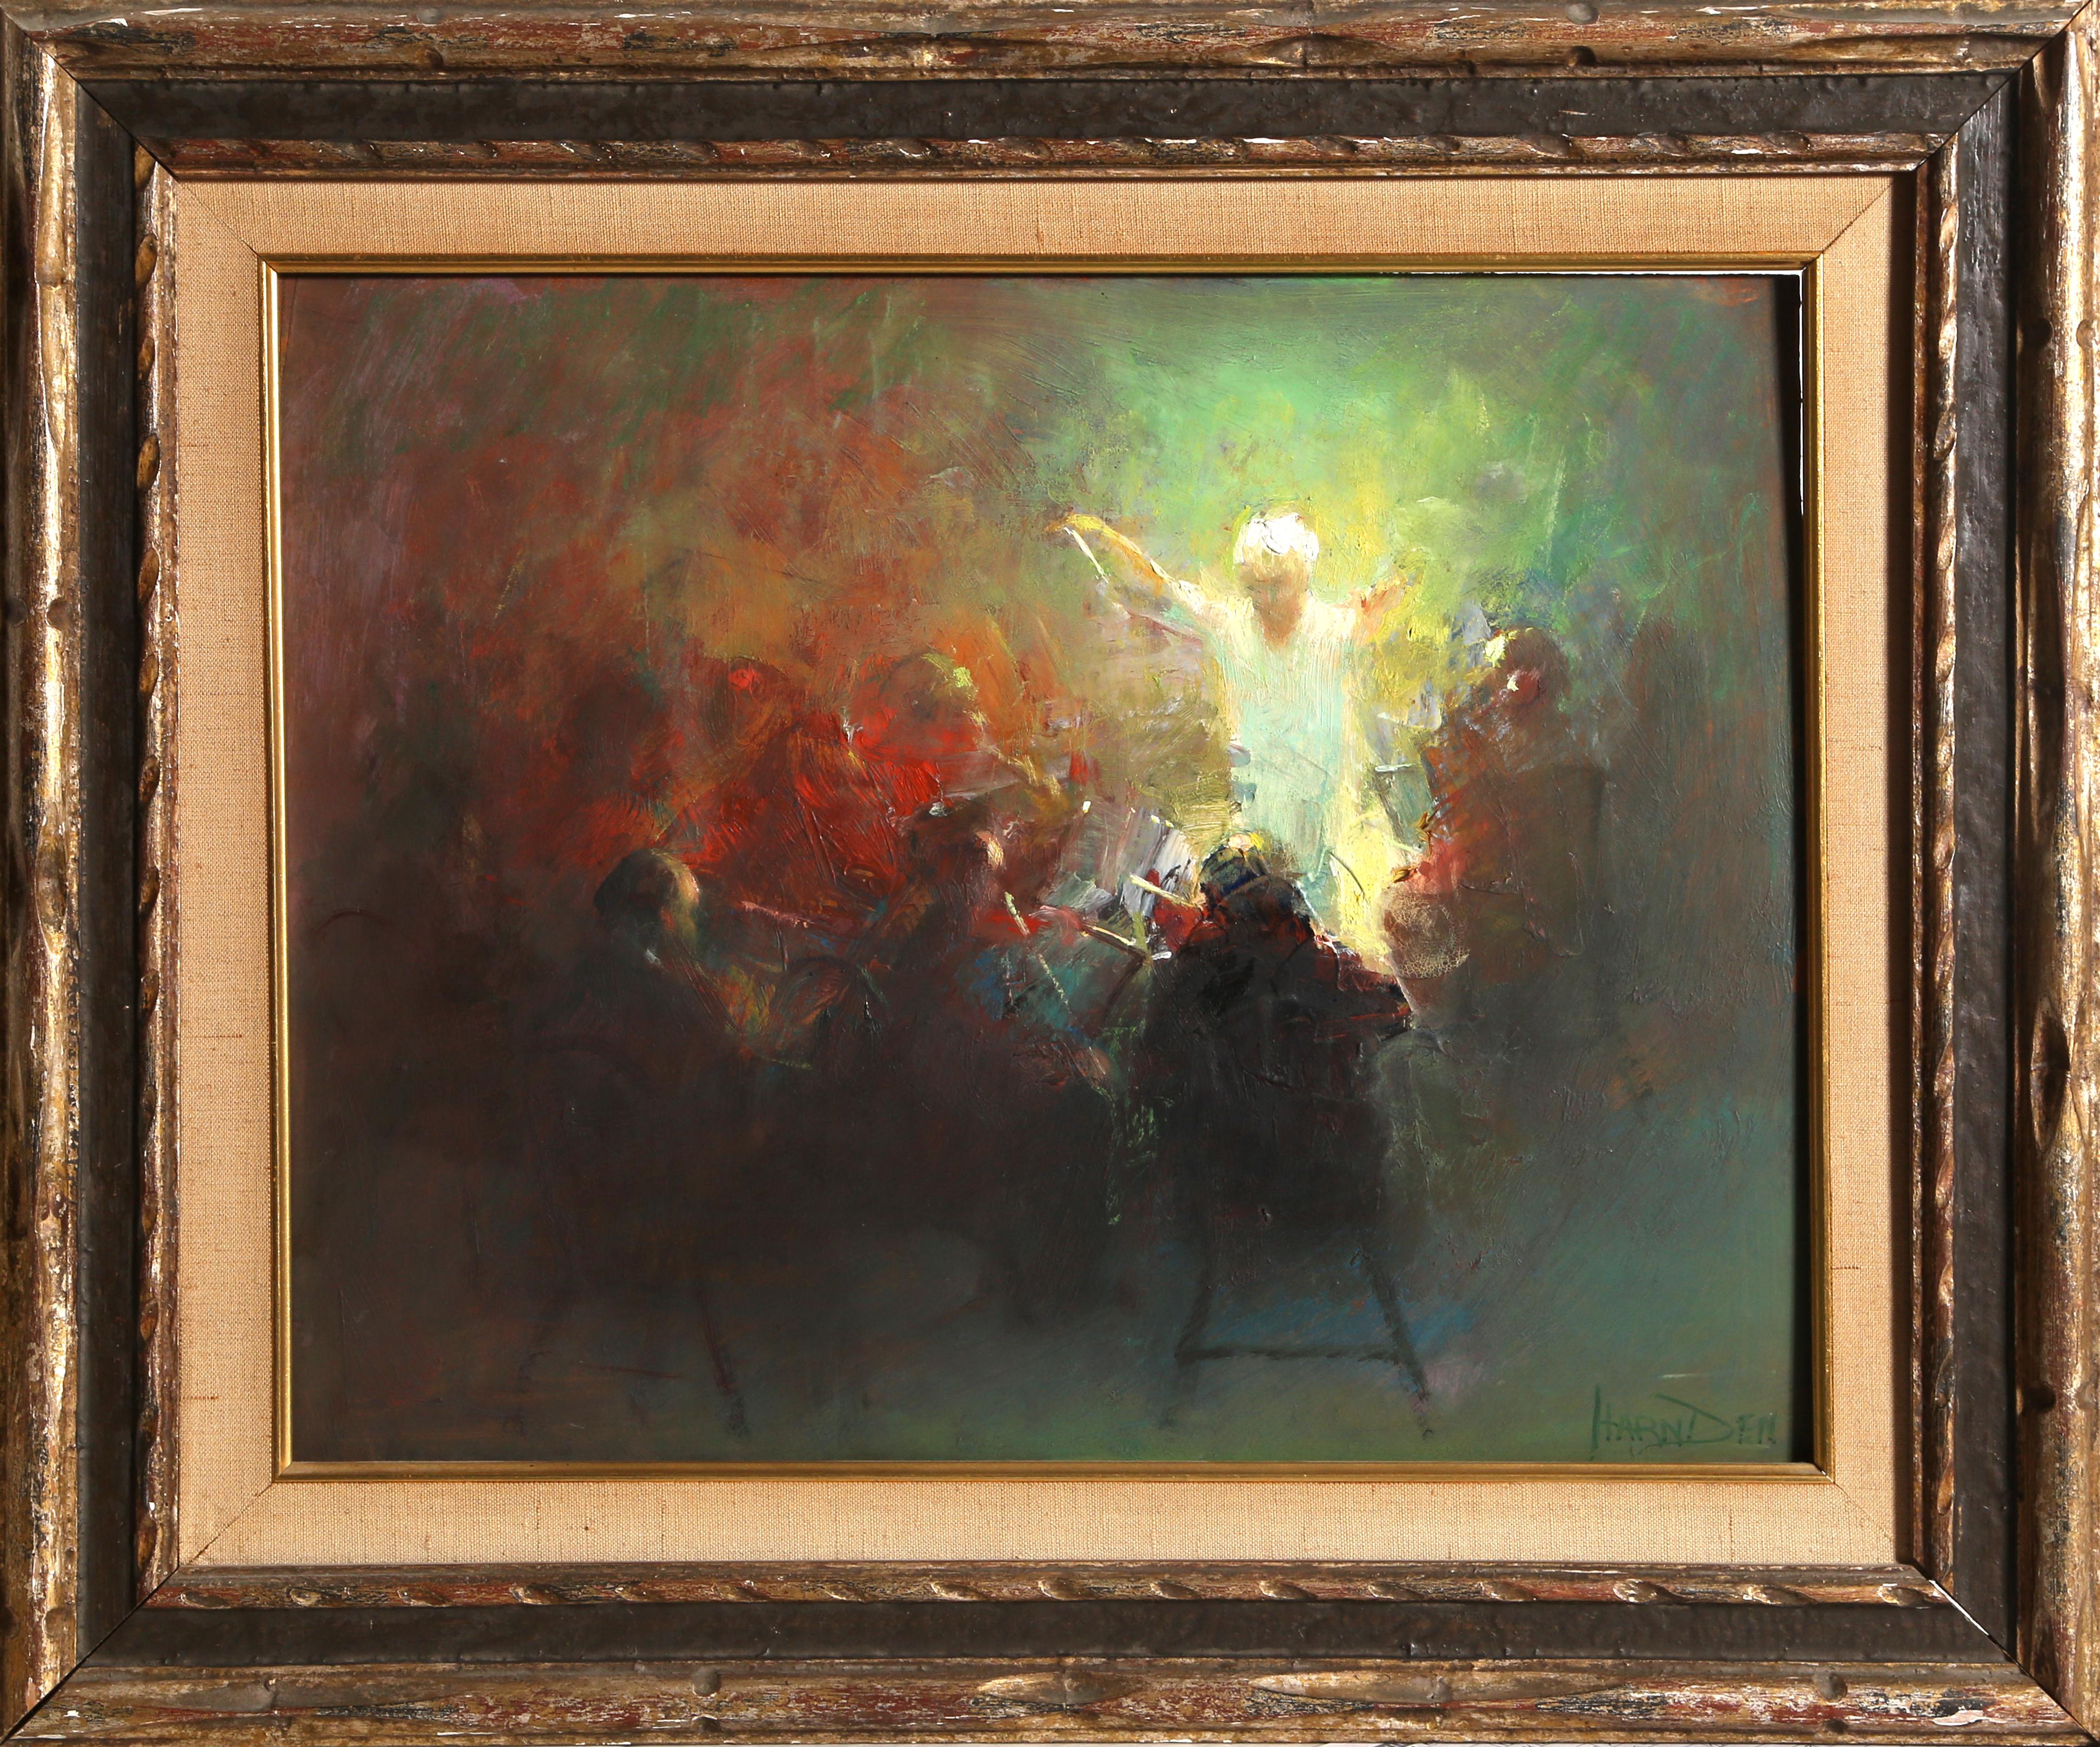 Concert, Figurative Oil Painting by William Harnden